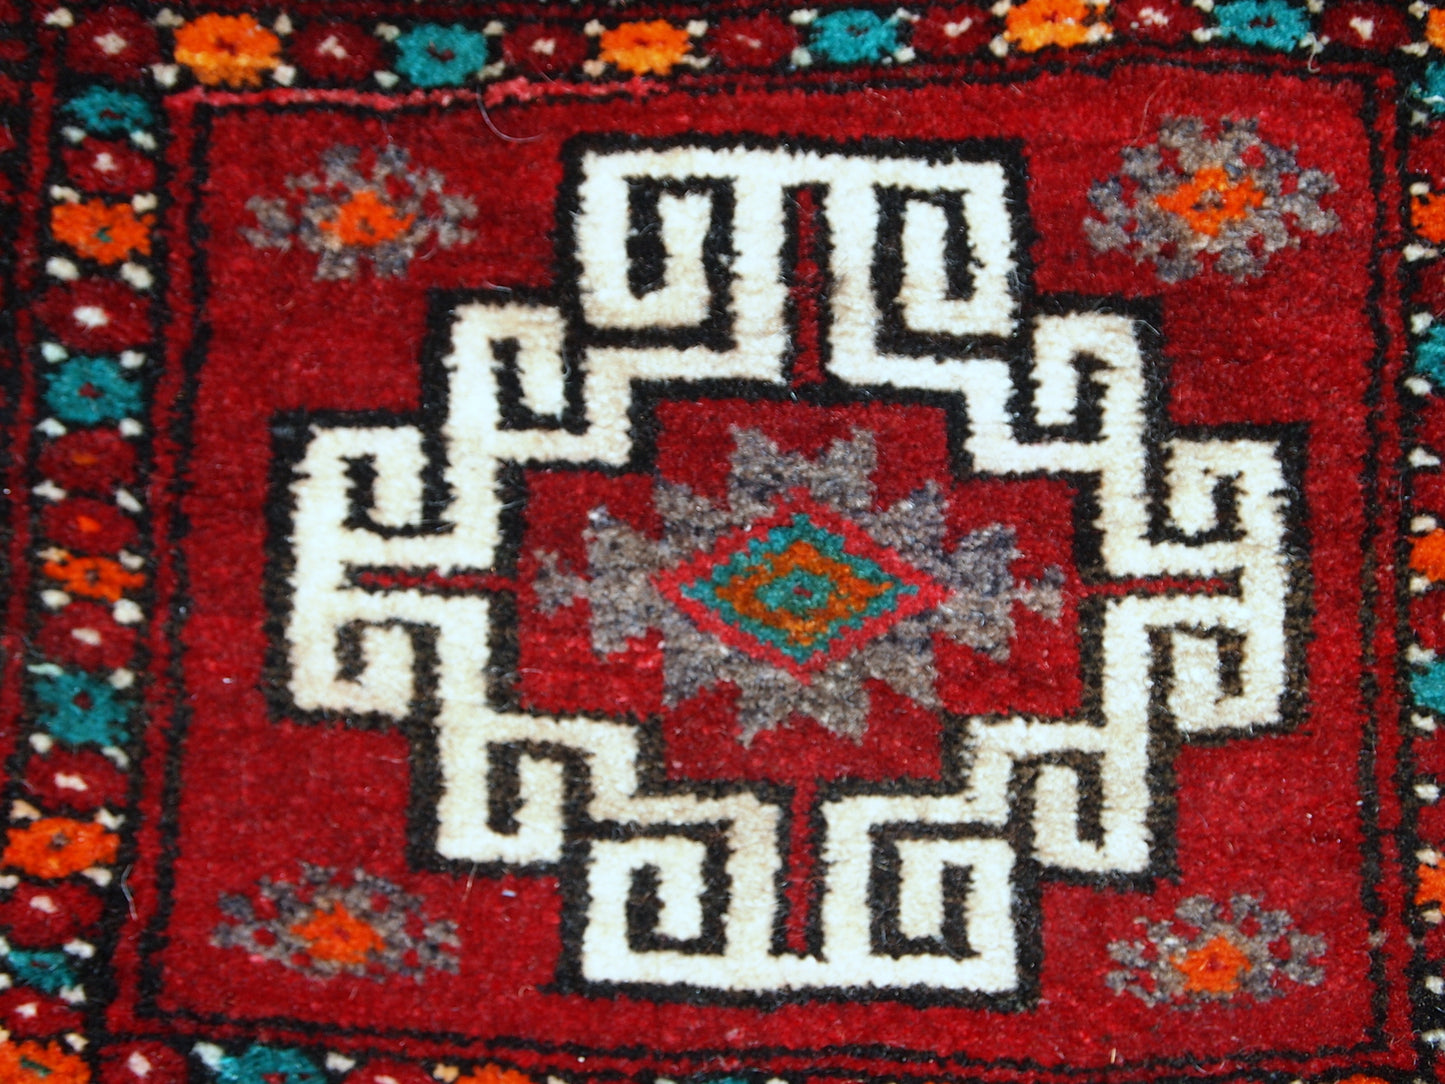 Hand crafted Turkish Anatolian bag in original good condition. The bag is from 1970s in red, orange and turquoise shades.